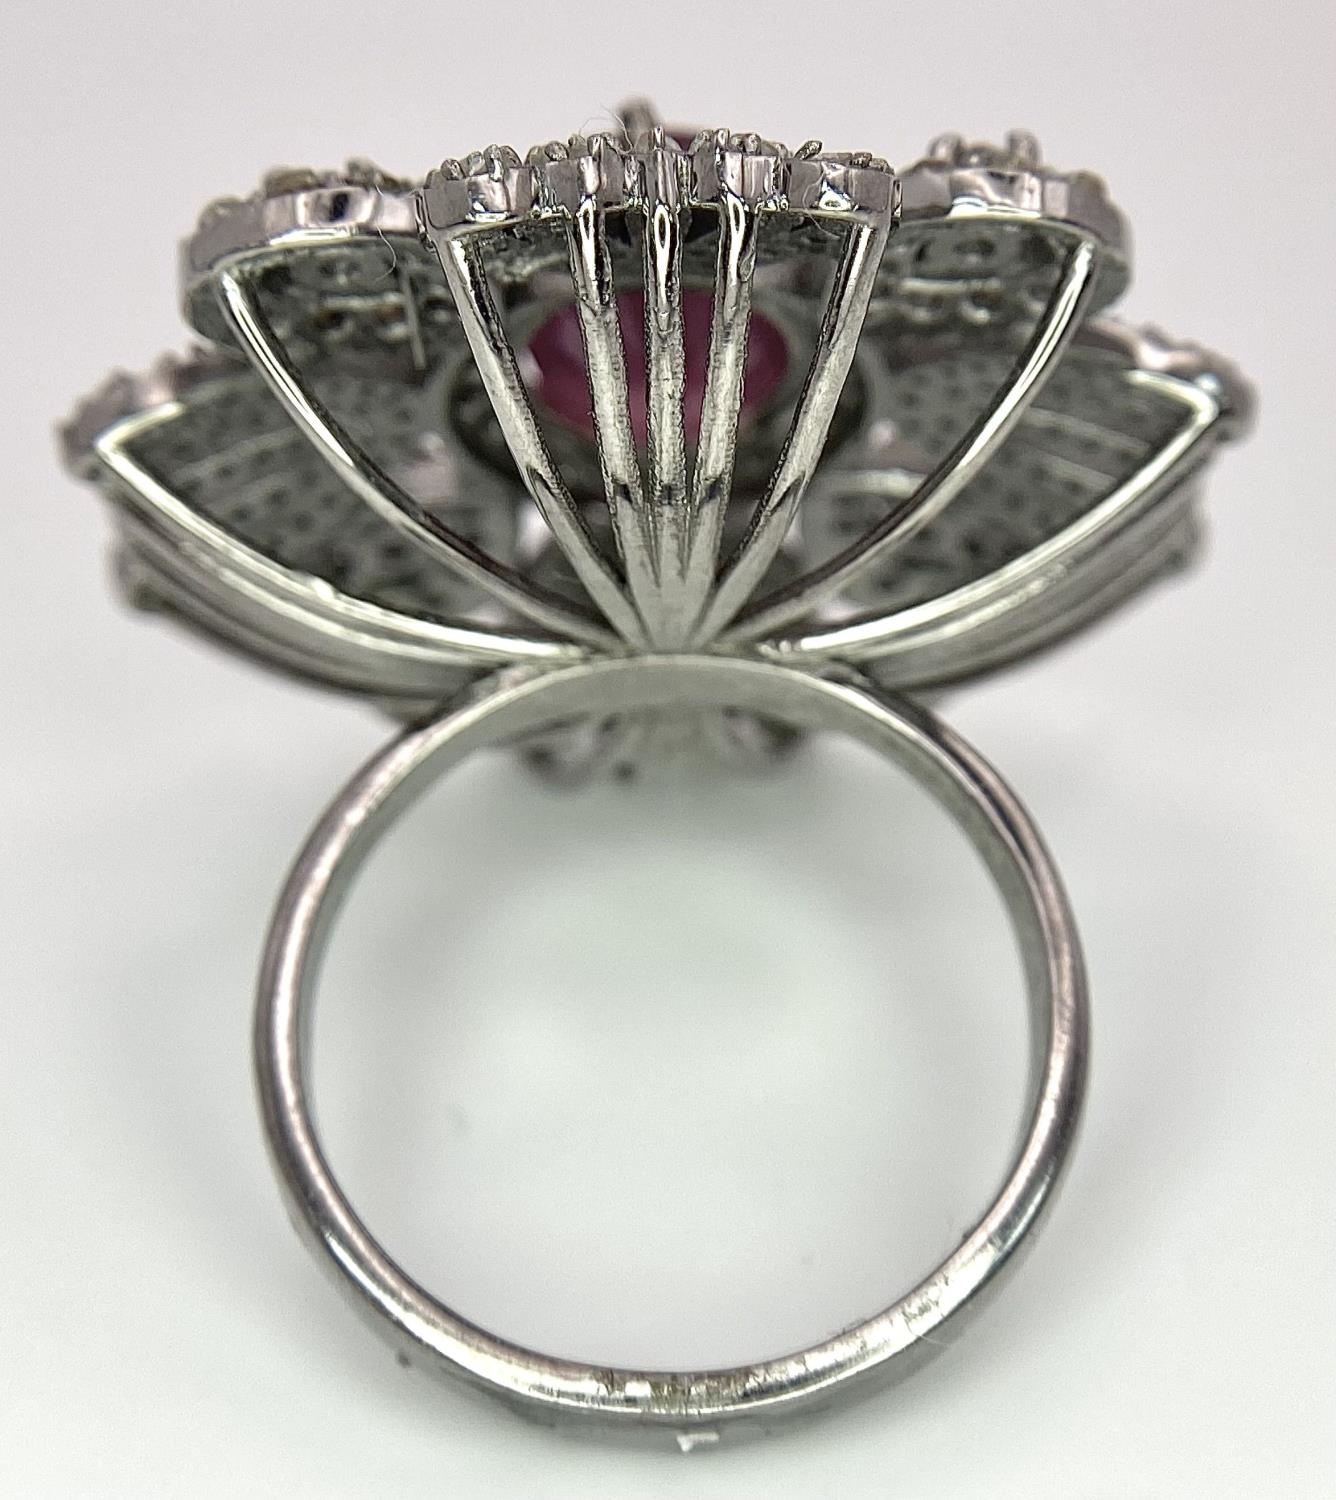 A 5ct Ruby Gemstone Cocktail Ring with 2ctw of Old Cut Diamond Decoration. Set in 925 Silver. Size - Image 5 of 6